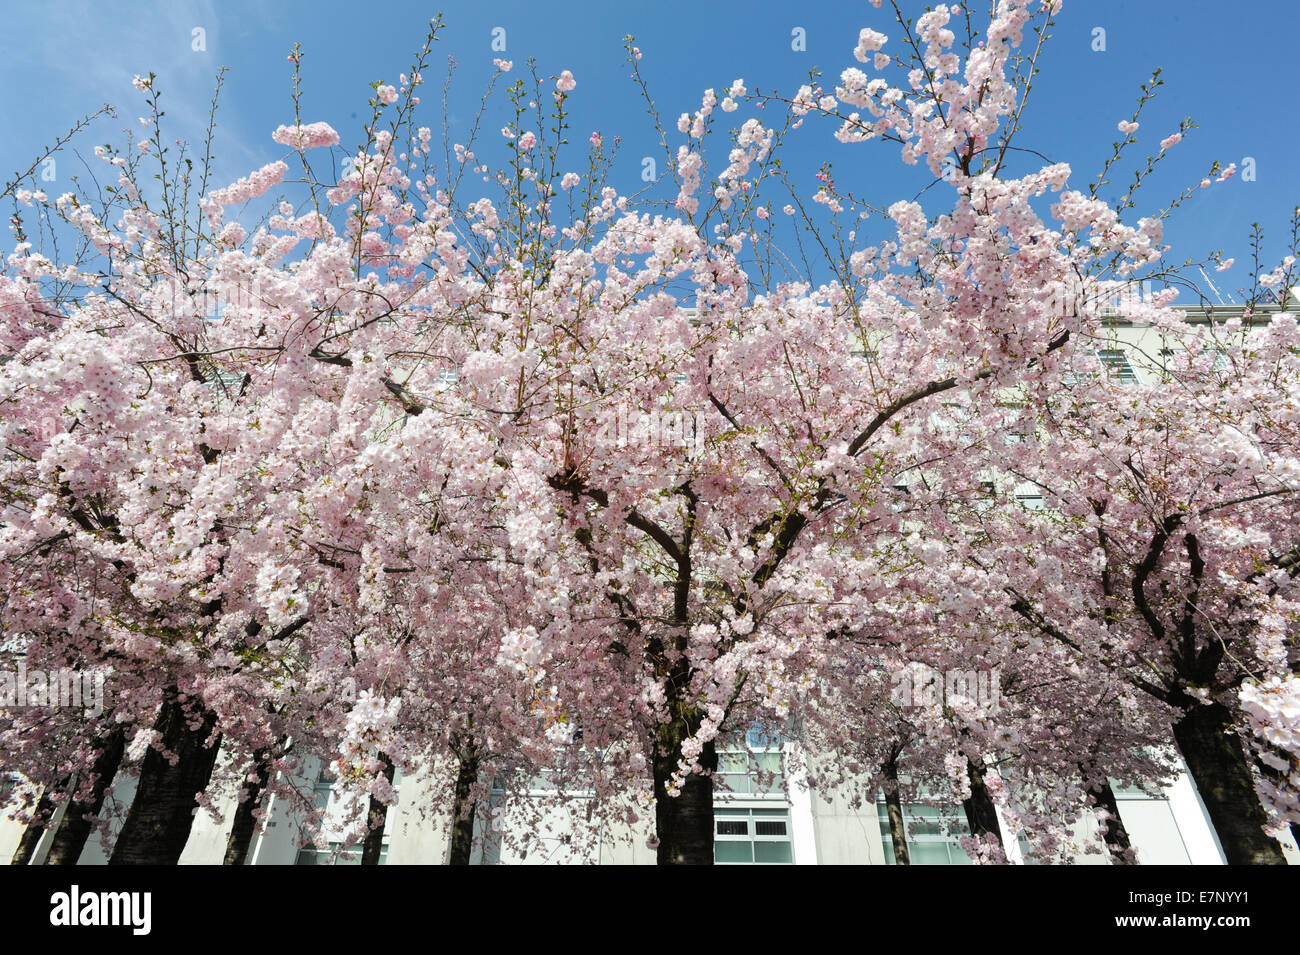 background, big, bloom, blooming, blossom, branch, branches, bright, building, city, delicate, flower, flowering, flowers, fragr Stock Photo